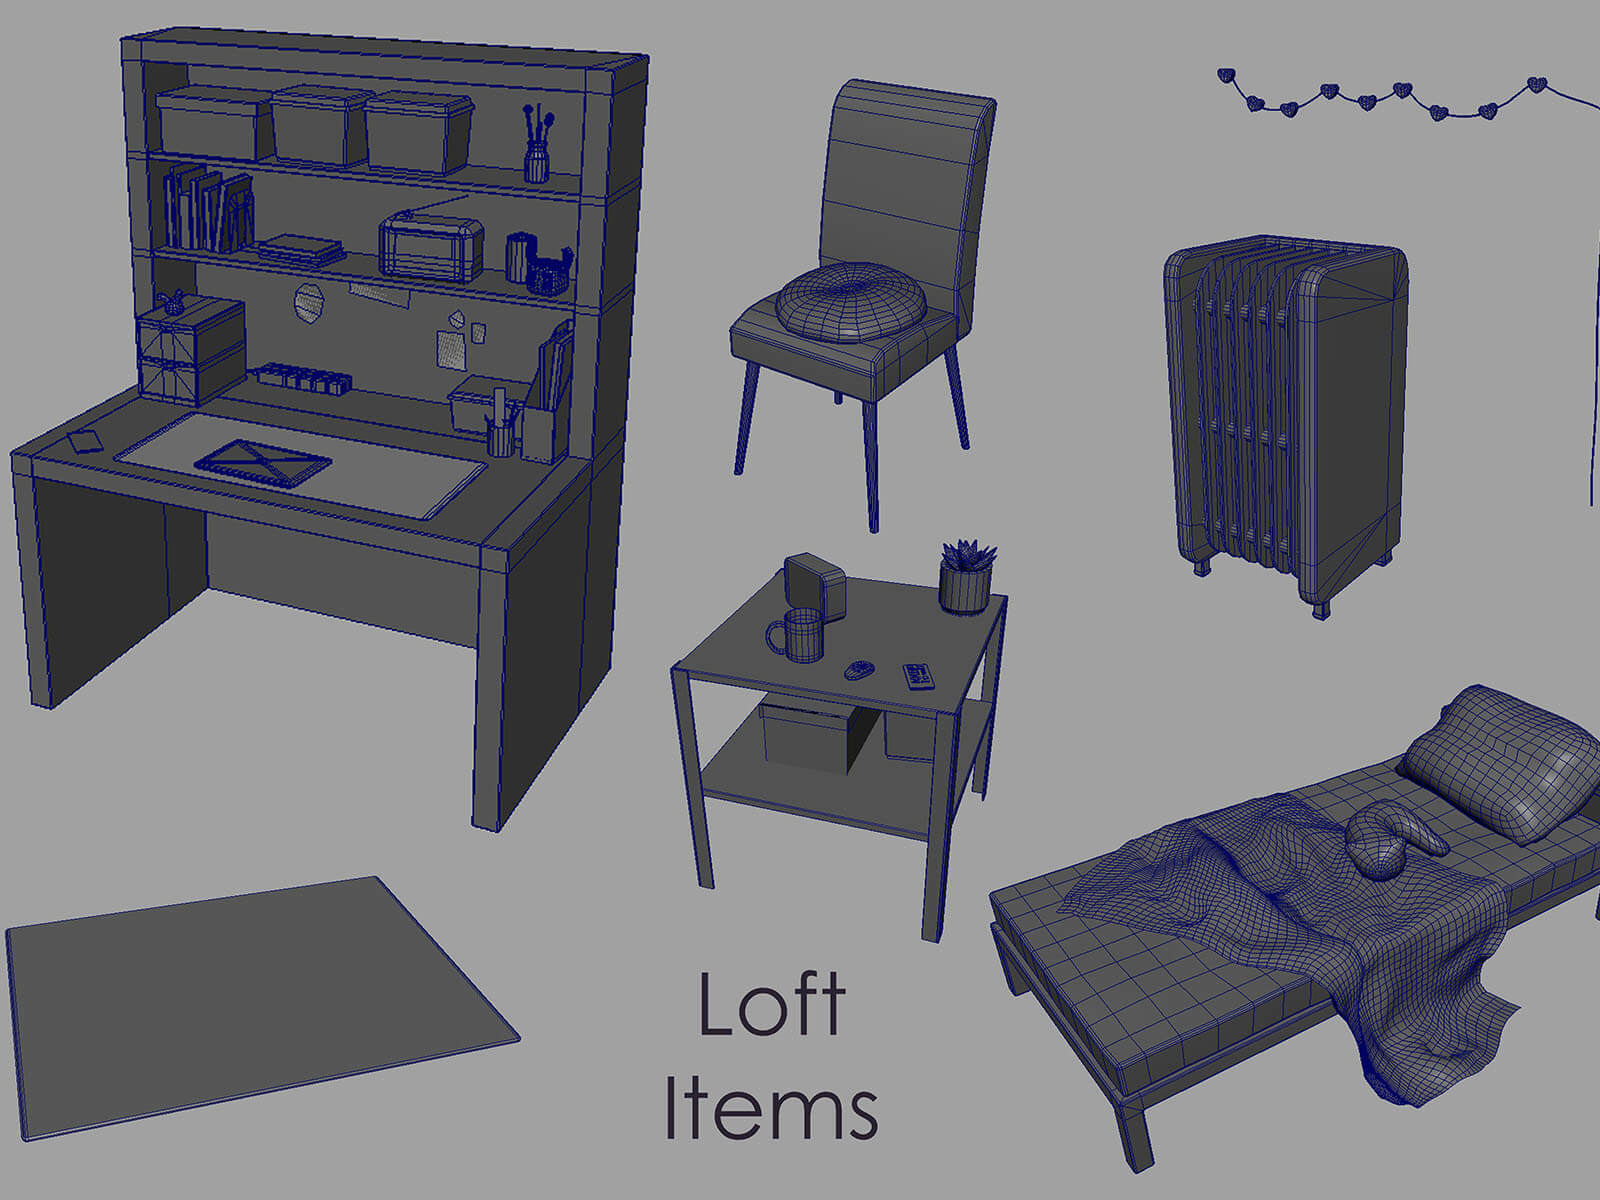 Collection of untextured 3D objects used in the scene's loft area